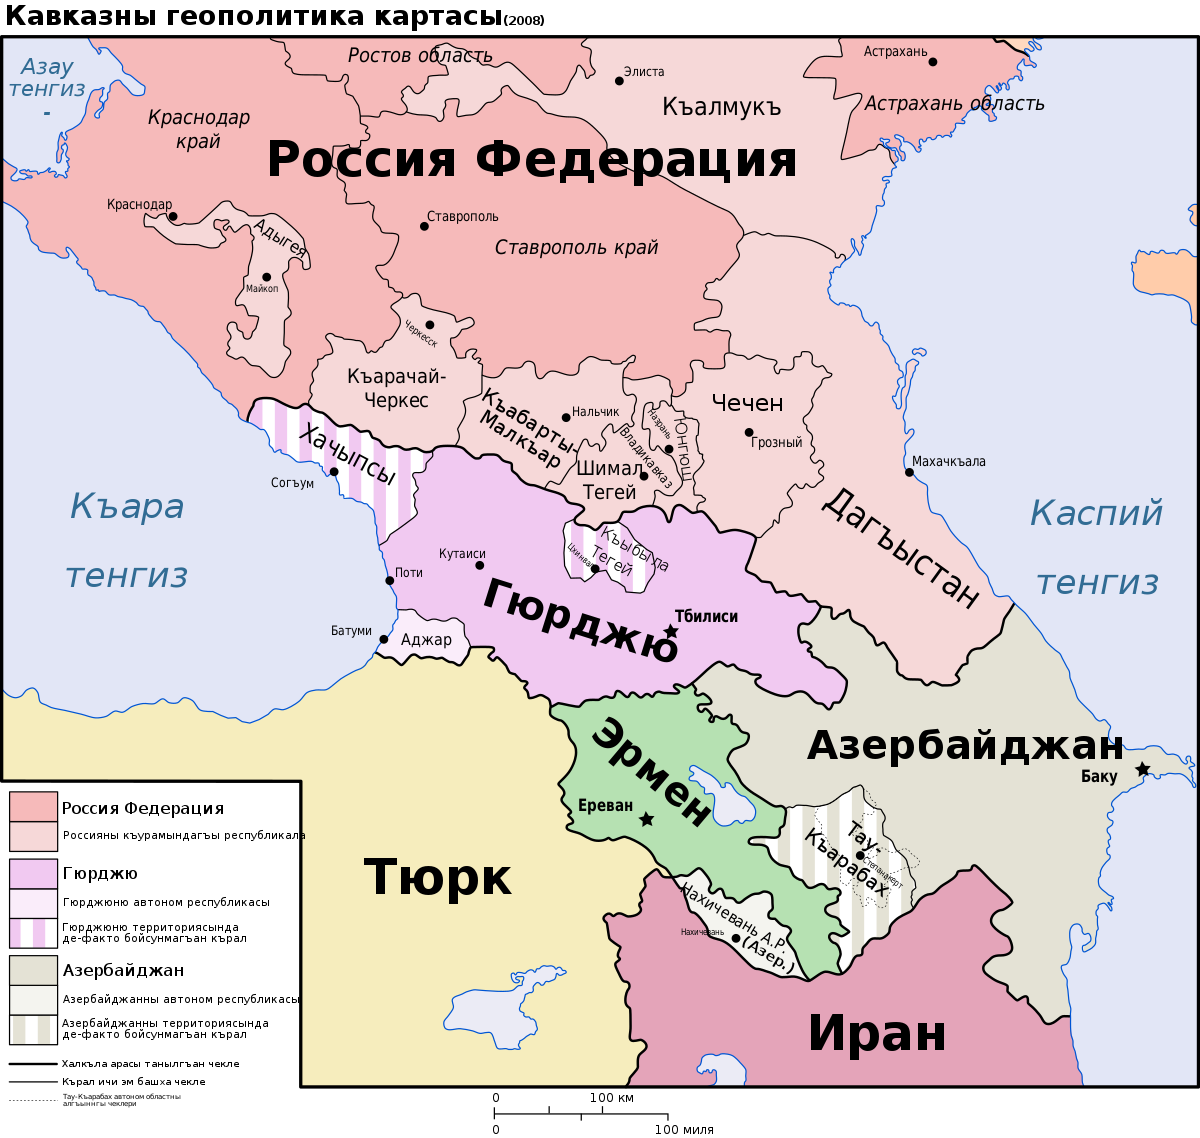 https://upload.wikimedia.org/wikipedia/commons/thumb/0/0c/Caucasus-political-krc.svg/1200px-Caucasus-political-krc.svg.png